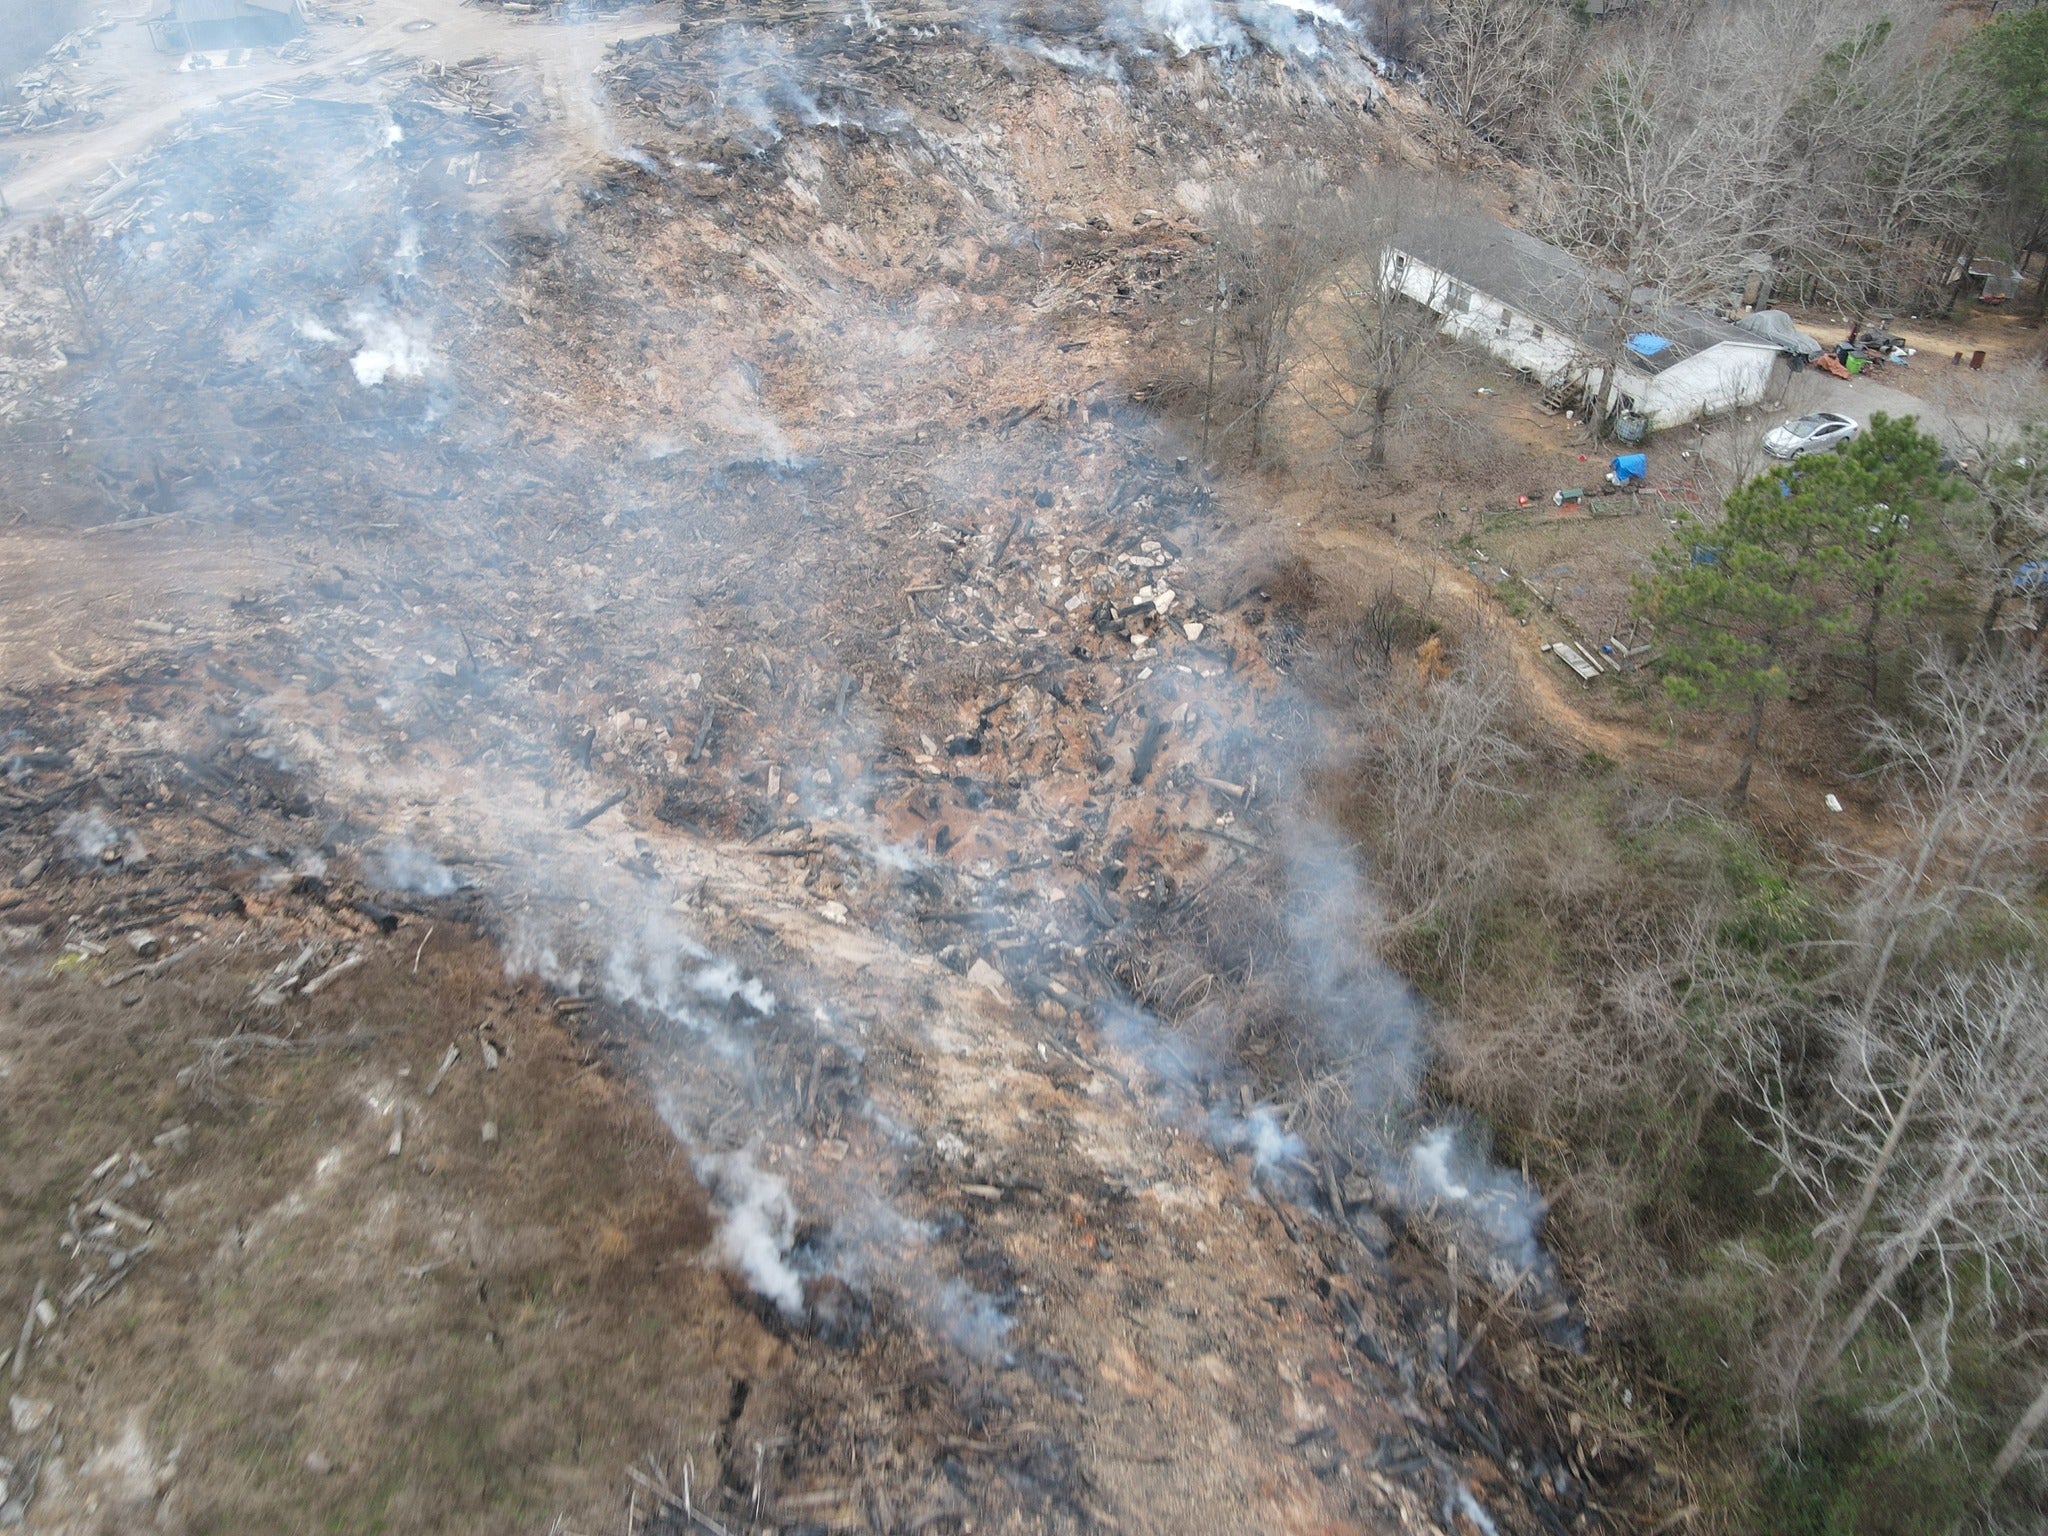 A Noxious Underground Landfill Fire Has Burned for Weeks in Alabama